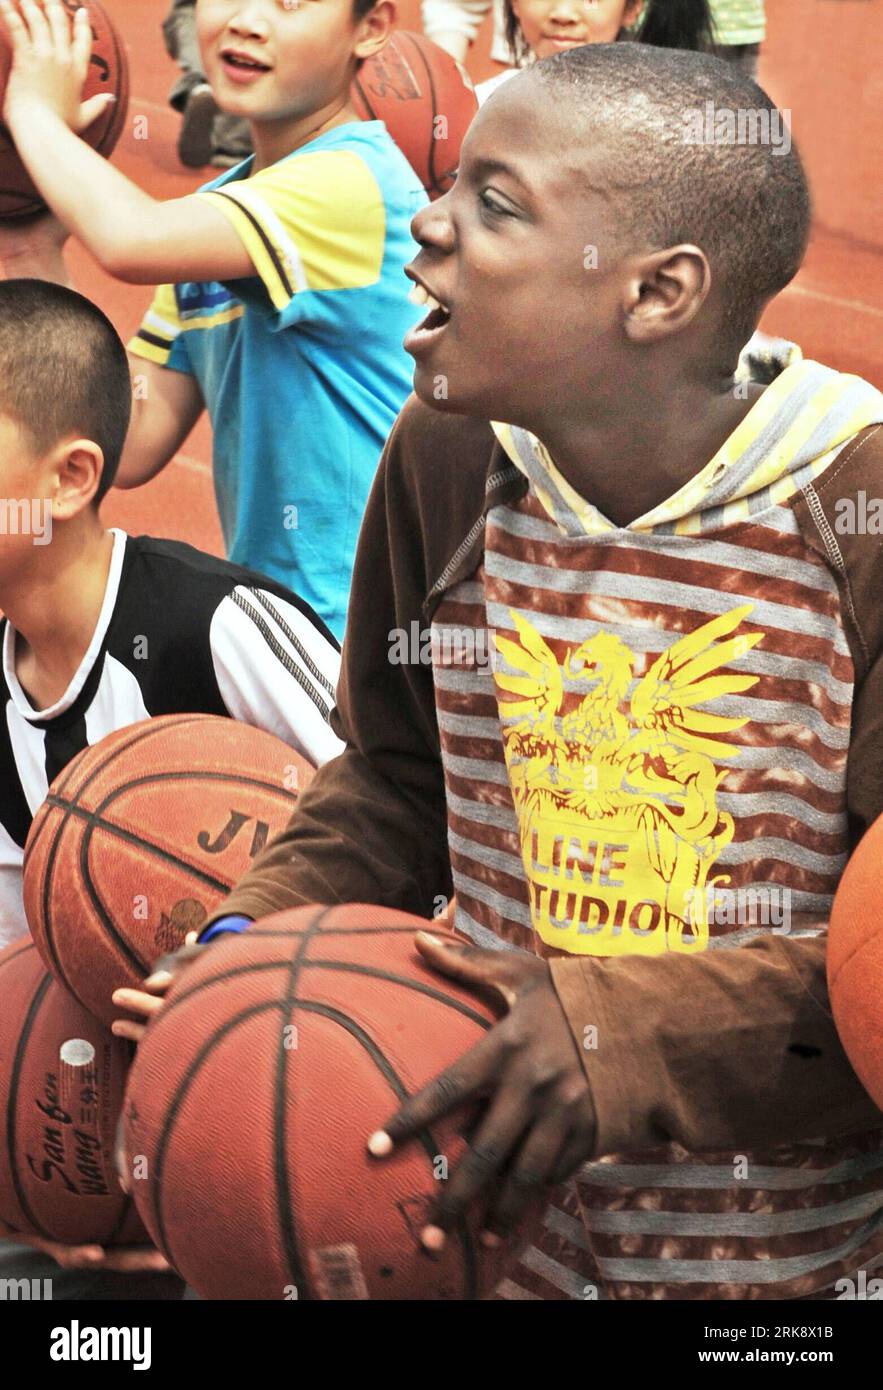 Bildnummer: 54080501  Datum: 26.05.2010  Copyright: imago/Xinhua (100527) -- YIWU, May 27, 2010 (Xinhua) -- Muhammed plays basketball at school, in Yiwu, east China s Zhejiang Province, May 26, 2010. Muhammed, 11 years old, and his sister Kichh, 8 years old, came to Yiwu 5 years ago with their parents who run businesses here. They entered a local school successively in 2007 and 2008, and they are very fond of Chinese culture. (Xinhua/Tan Jin) (lyi) (9)CHINA-YIWU-SENEGALESE CHILDREN (CN) PUBLICATIONxNOTxINxCHN kbdig xkg 2010 hoch o0 Gesellschaft Land Leute o00 Einwanderer, Kind    Bildnummer 54 Stock Photo